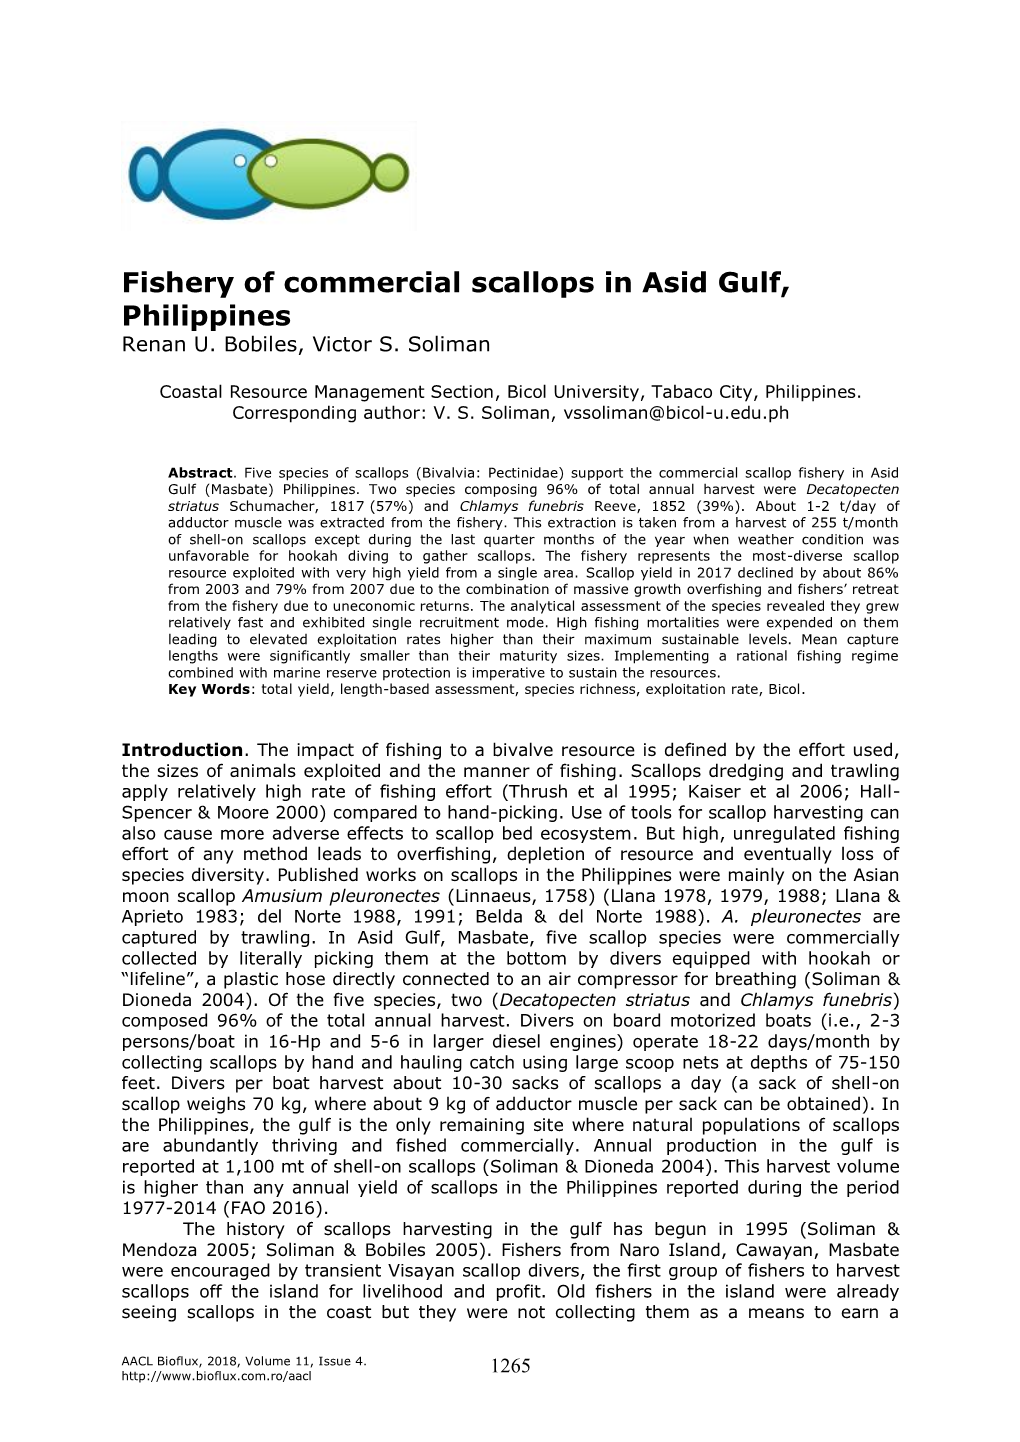 Fishery of Commercial Scallops in Asid Gulf, Philippines Renan U